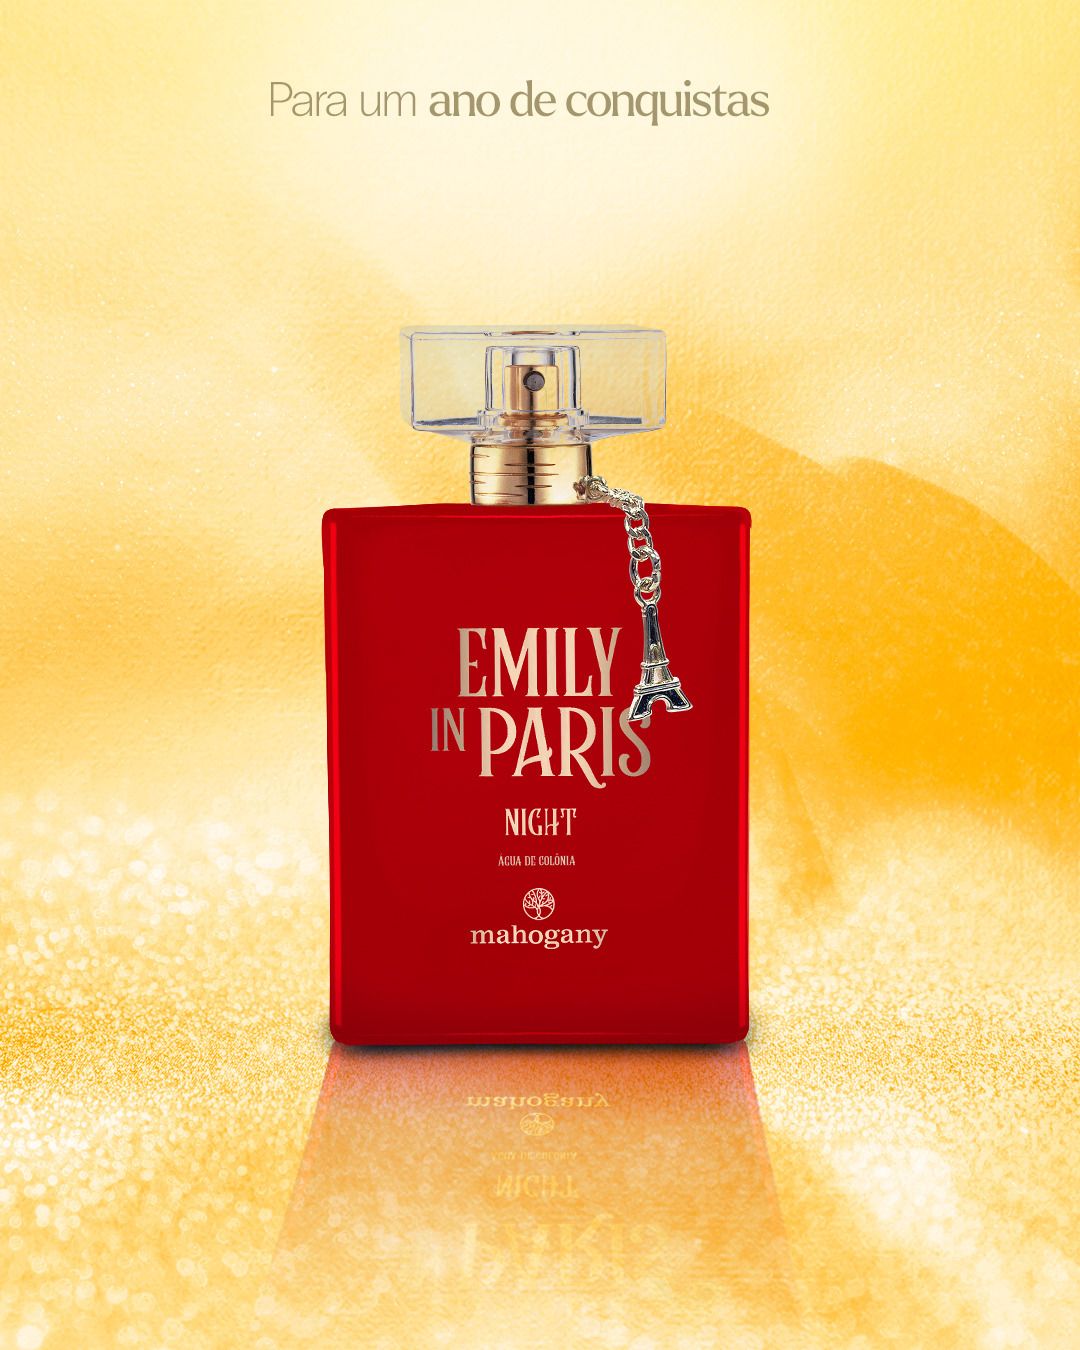 Emily in Paris Night Mahogany perfume - a new fragrance for women 2023